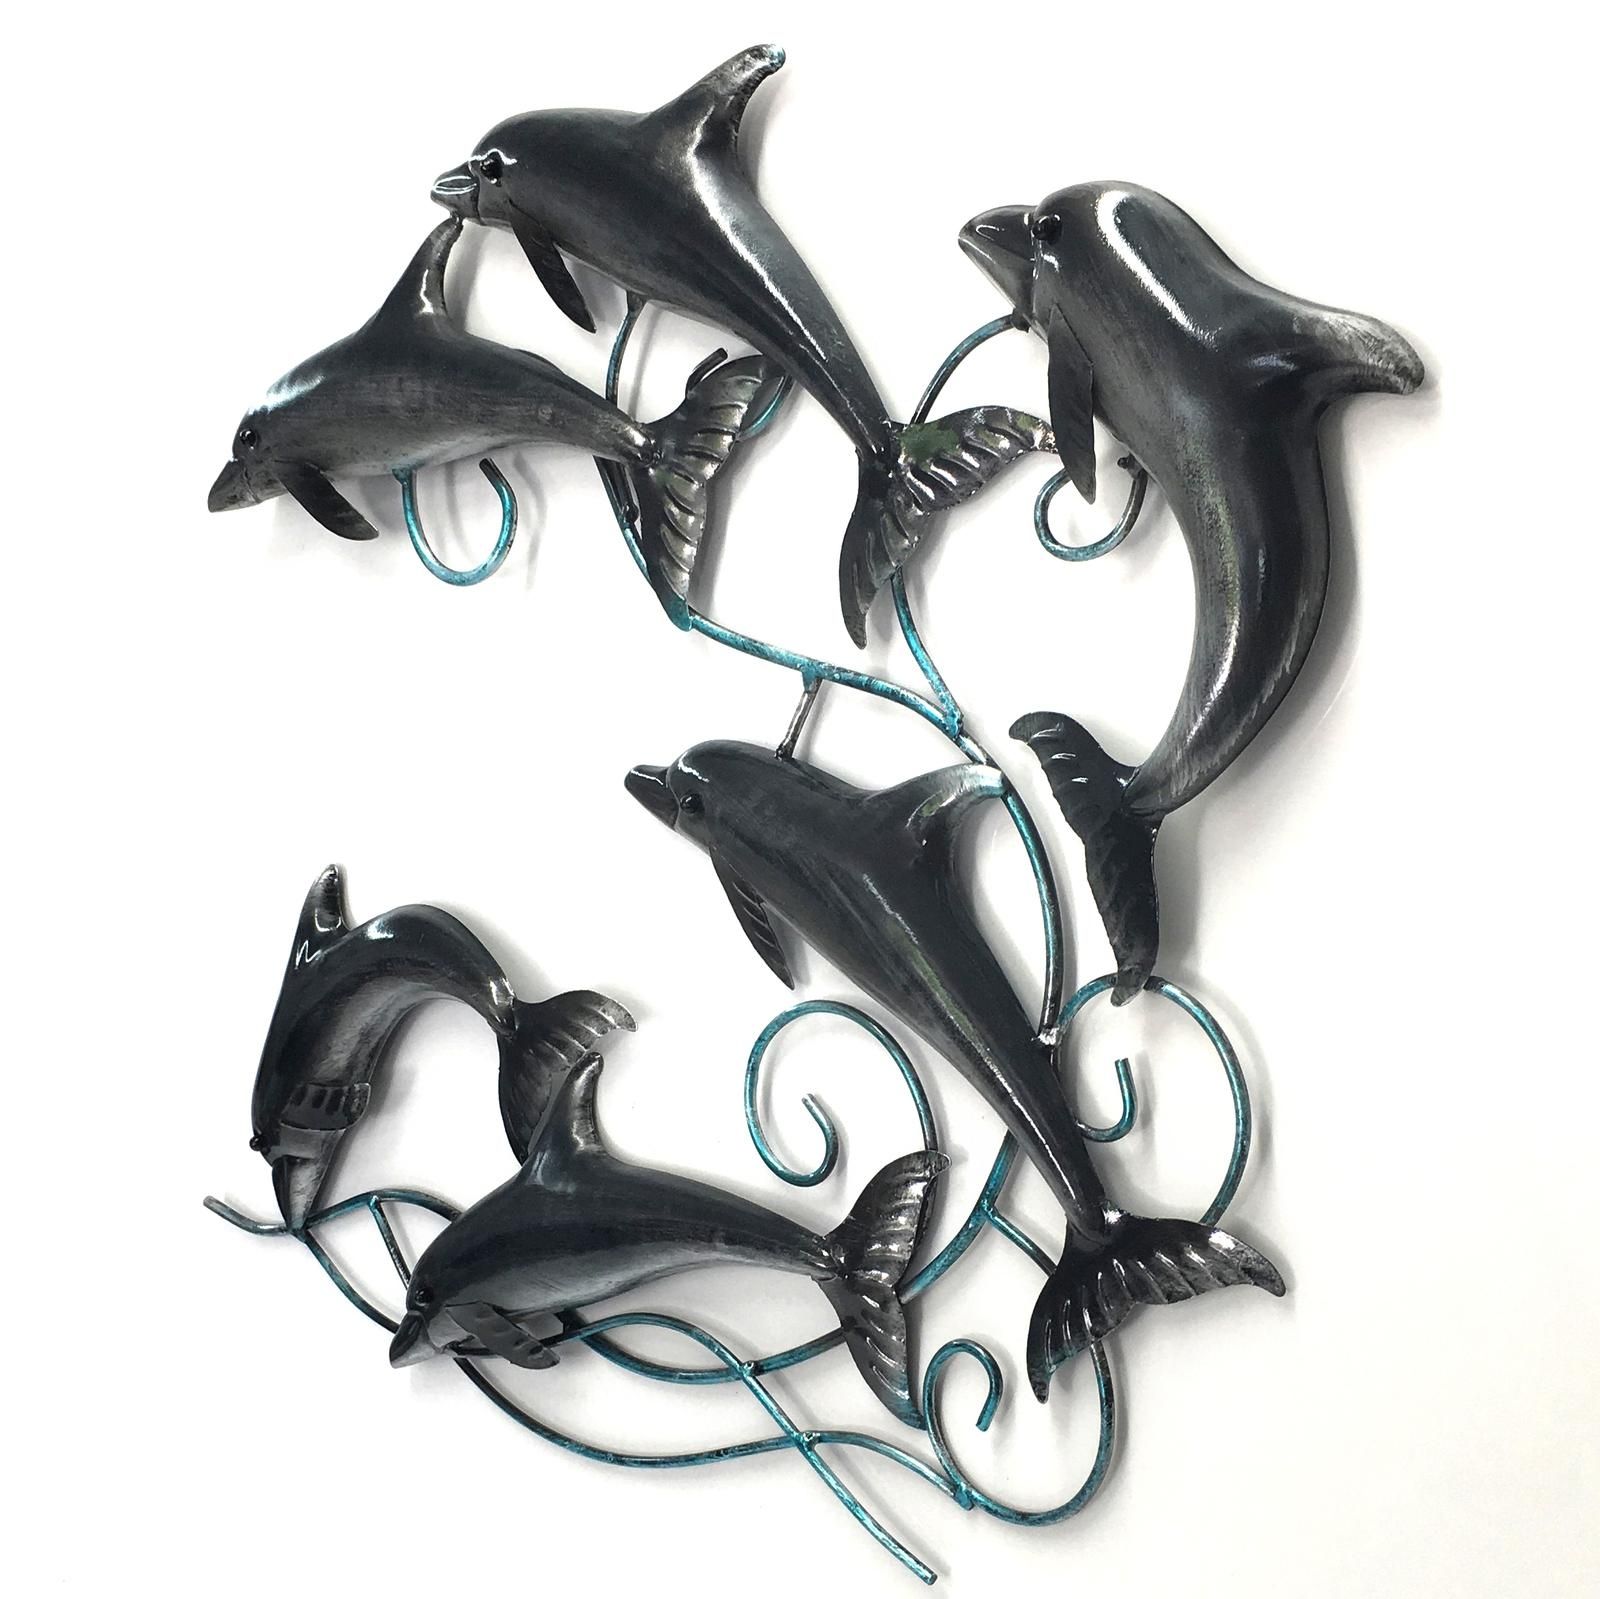 Dolphin Metal Wall Art Sculpture Hanging Garden Ornament Beach Big Inside Dolphin Metal Wall Art (View 20 of 20)